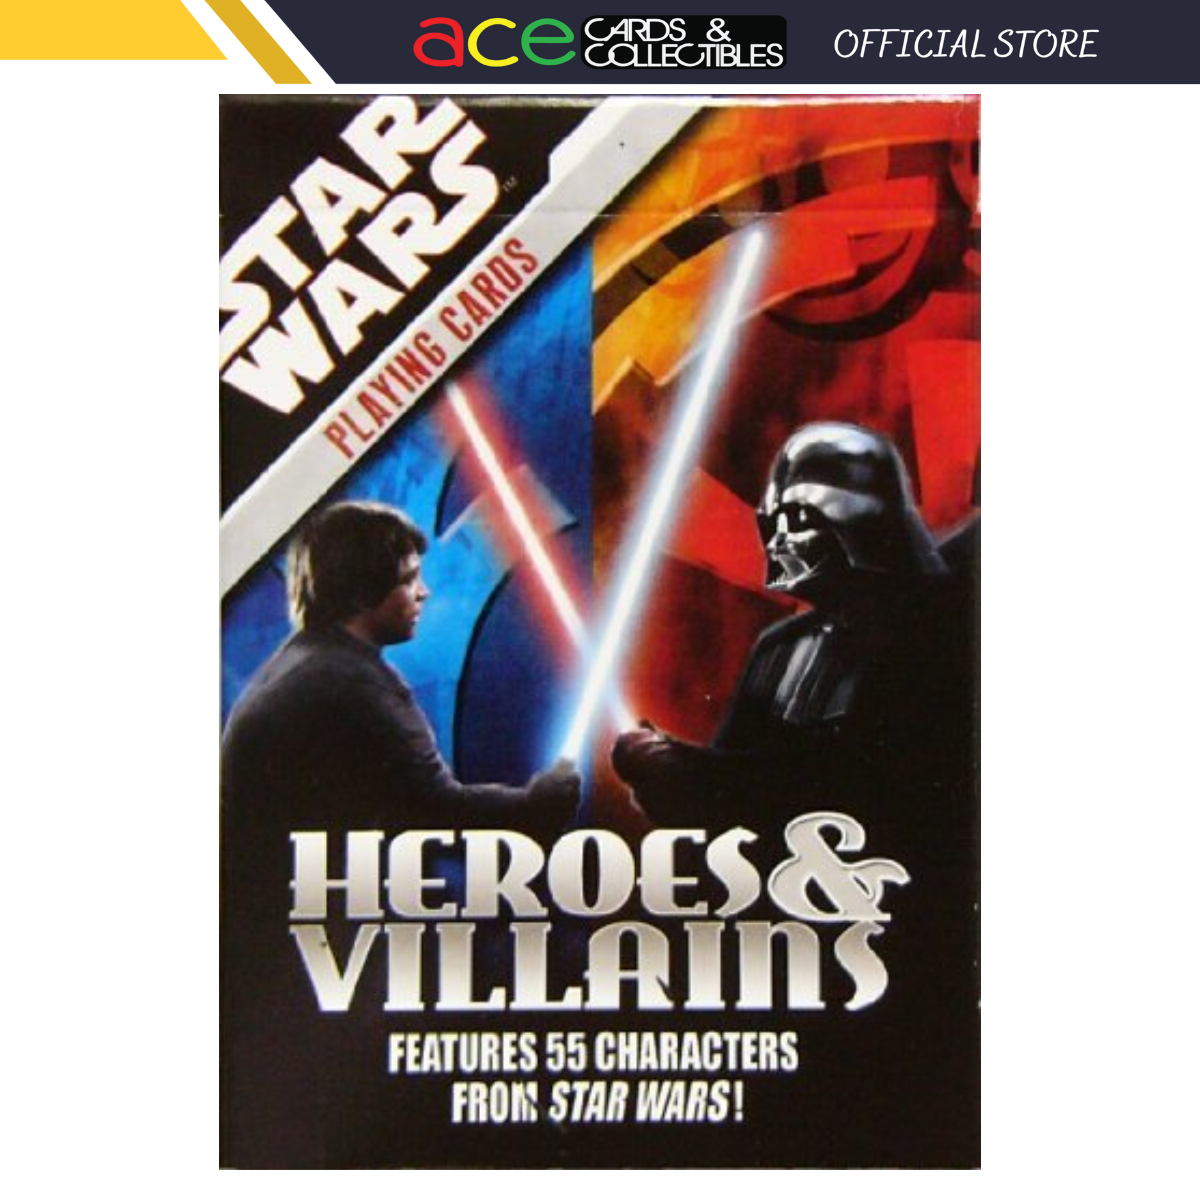 Star Wars Heroes & Villains Playing Cards-Cartamundi-Ace Cards & Collectibles